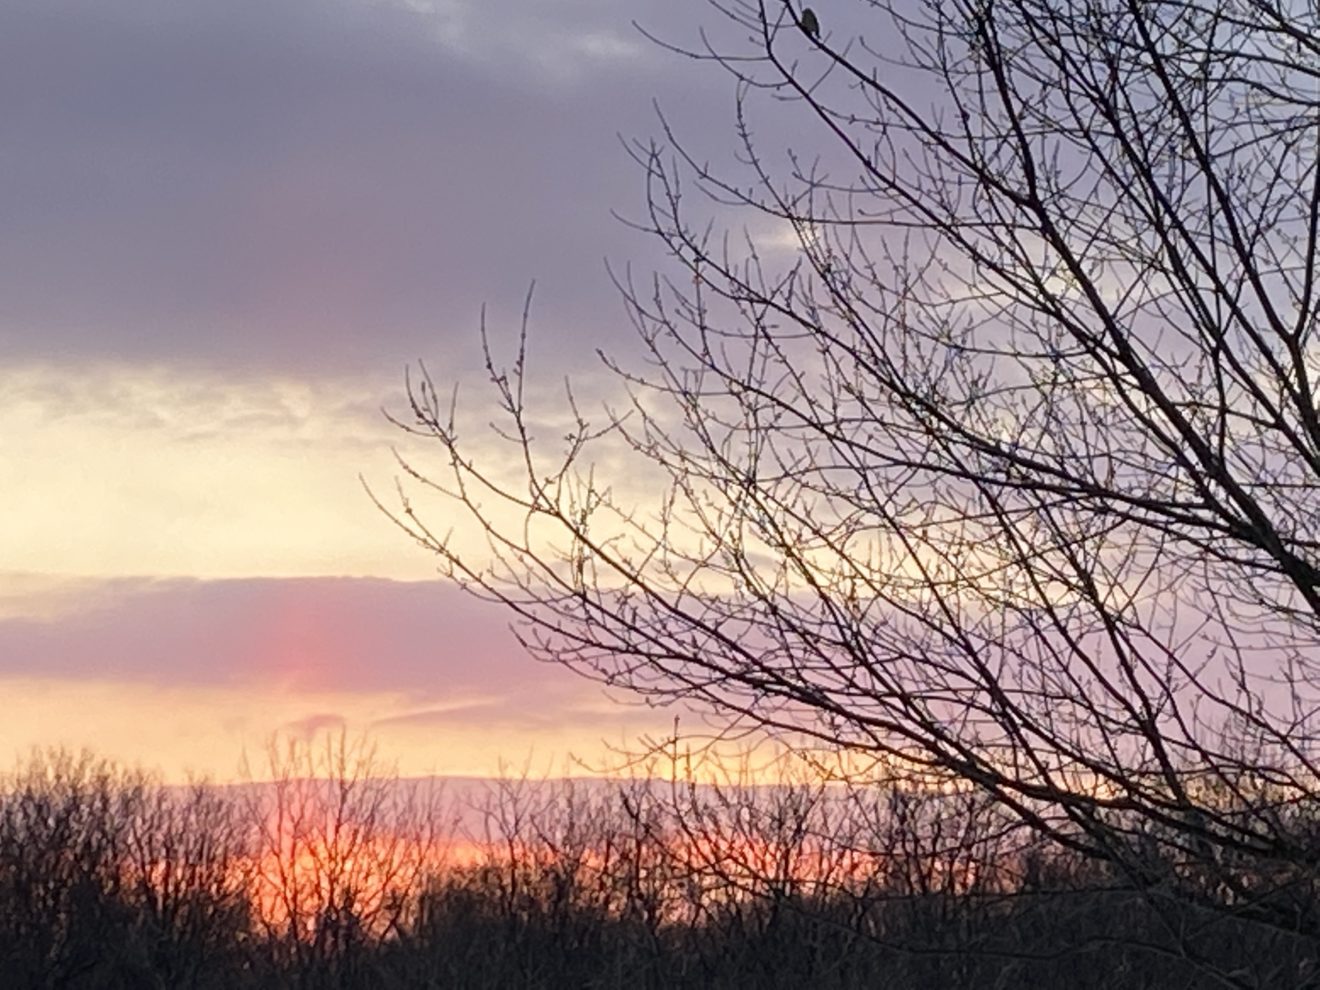 Enjoying the view from my window of a bare tree with a purple and orange-hued sunset while pondering how to strengthen the flow of Reiki as a receiver